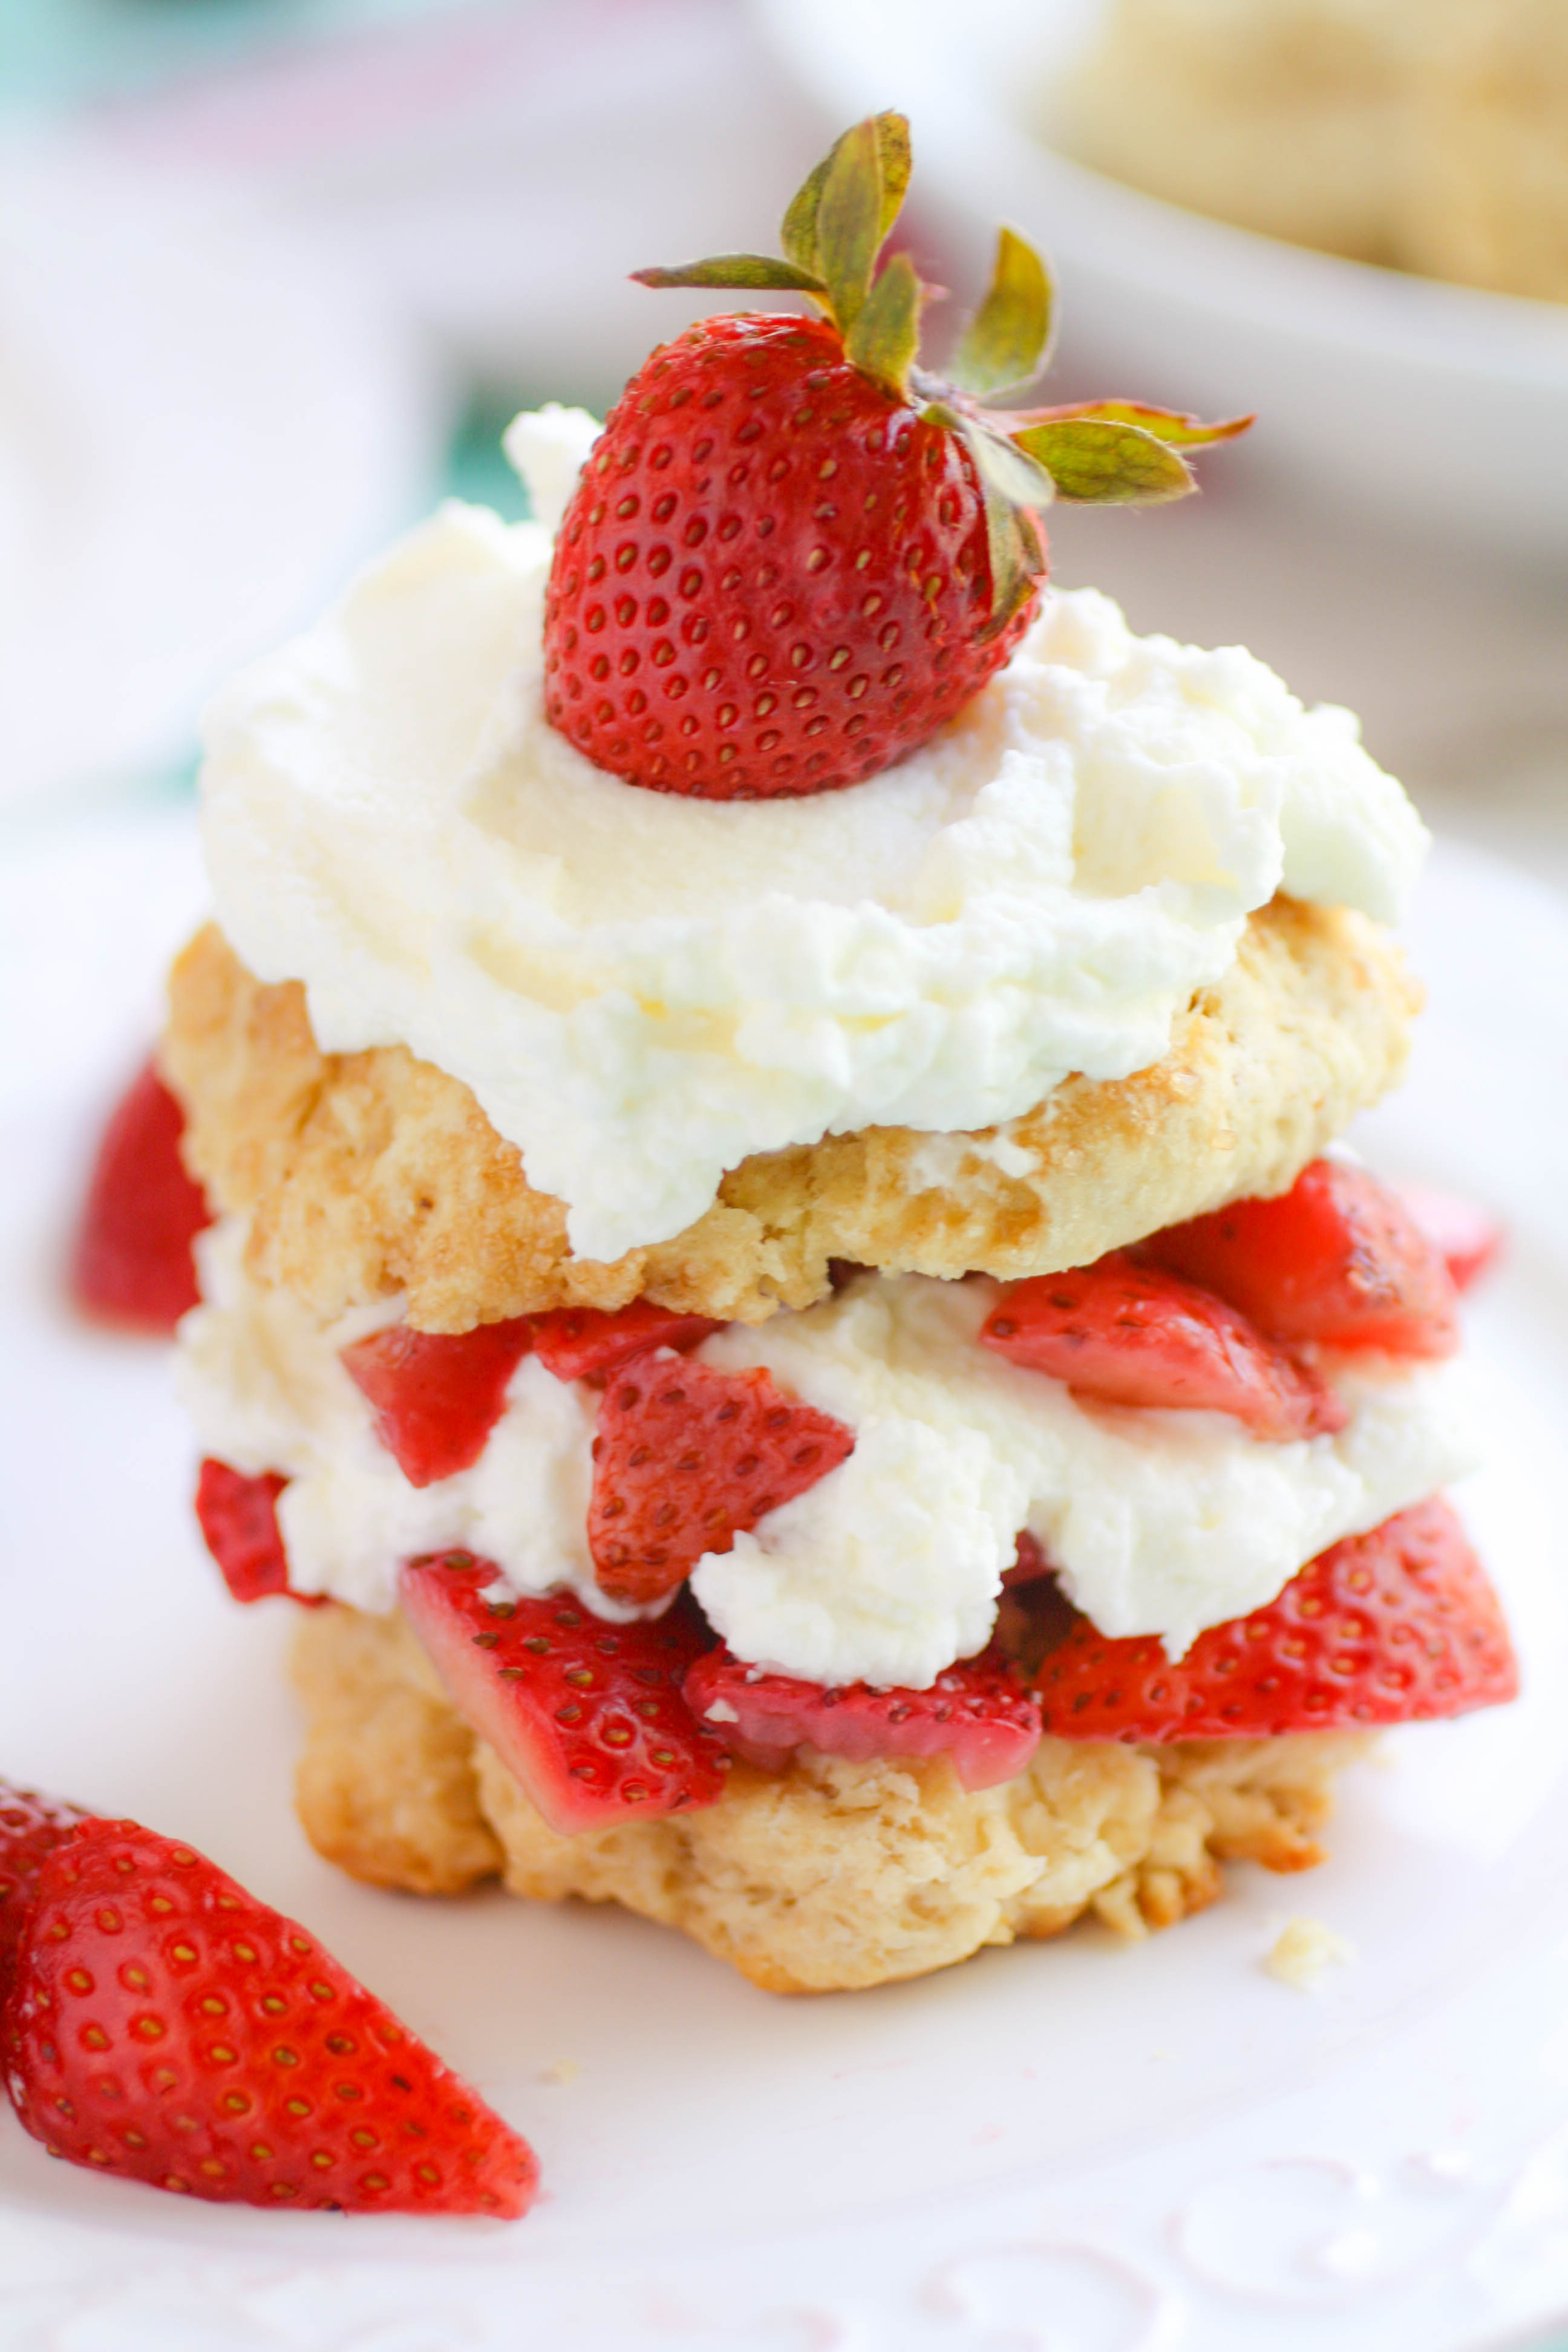 Ginger-Strawberry Shortcakes with Whipped Topping are so fun to serve for a sweet treat this season. Ginger-Strawberry Shortcakes with Whipped Topping is a delightful dessert!